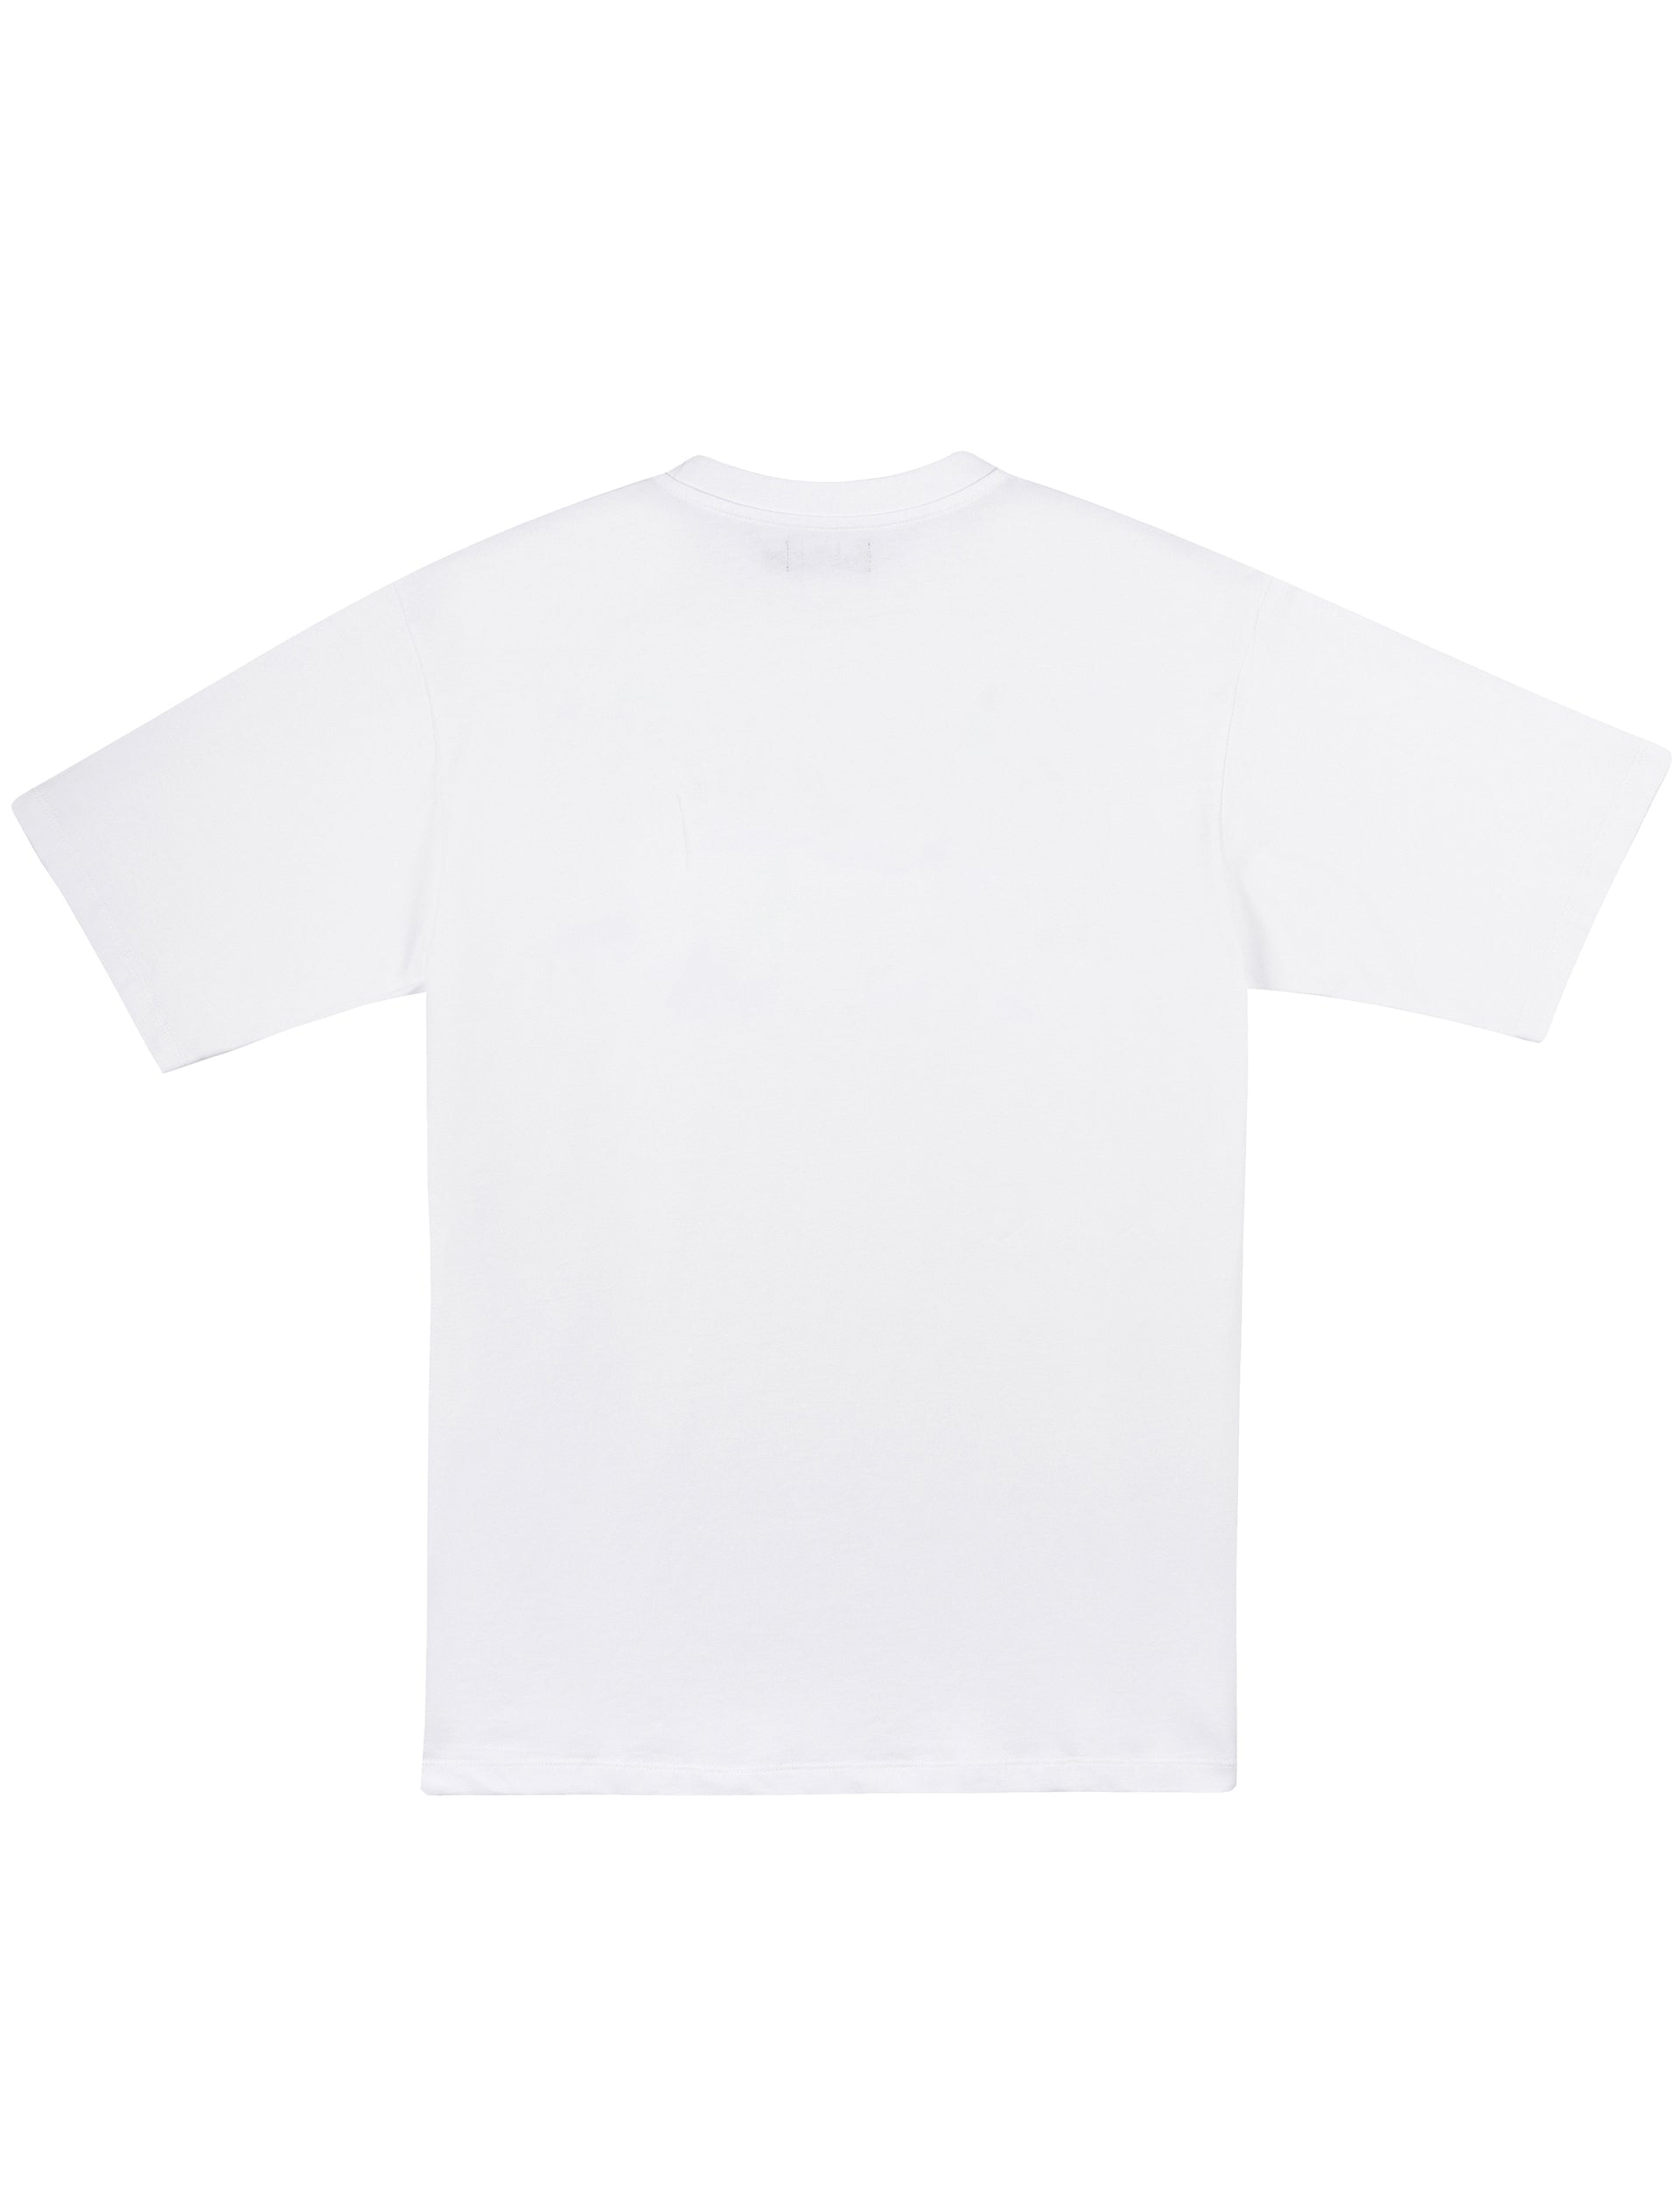 LATE CHECKOUT FLUFFY DICE TEE WHITE